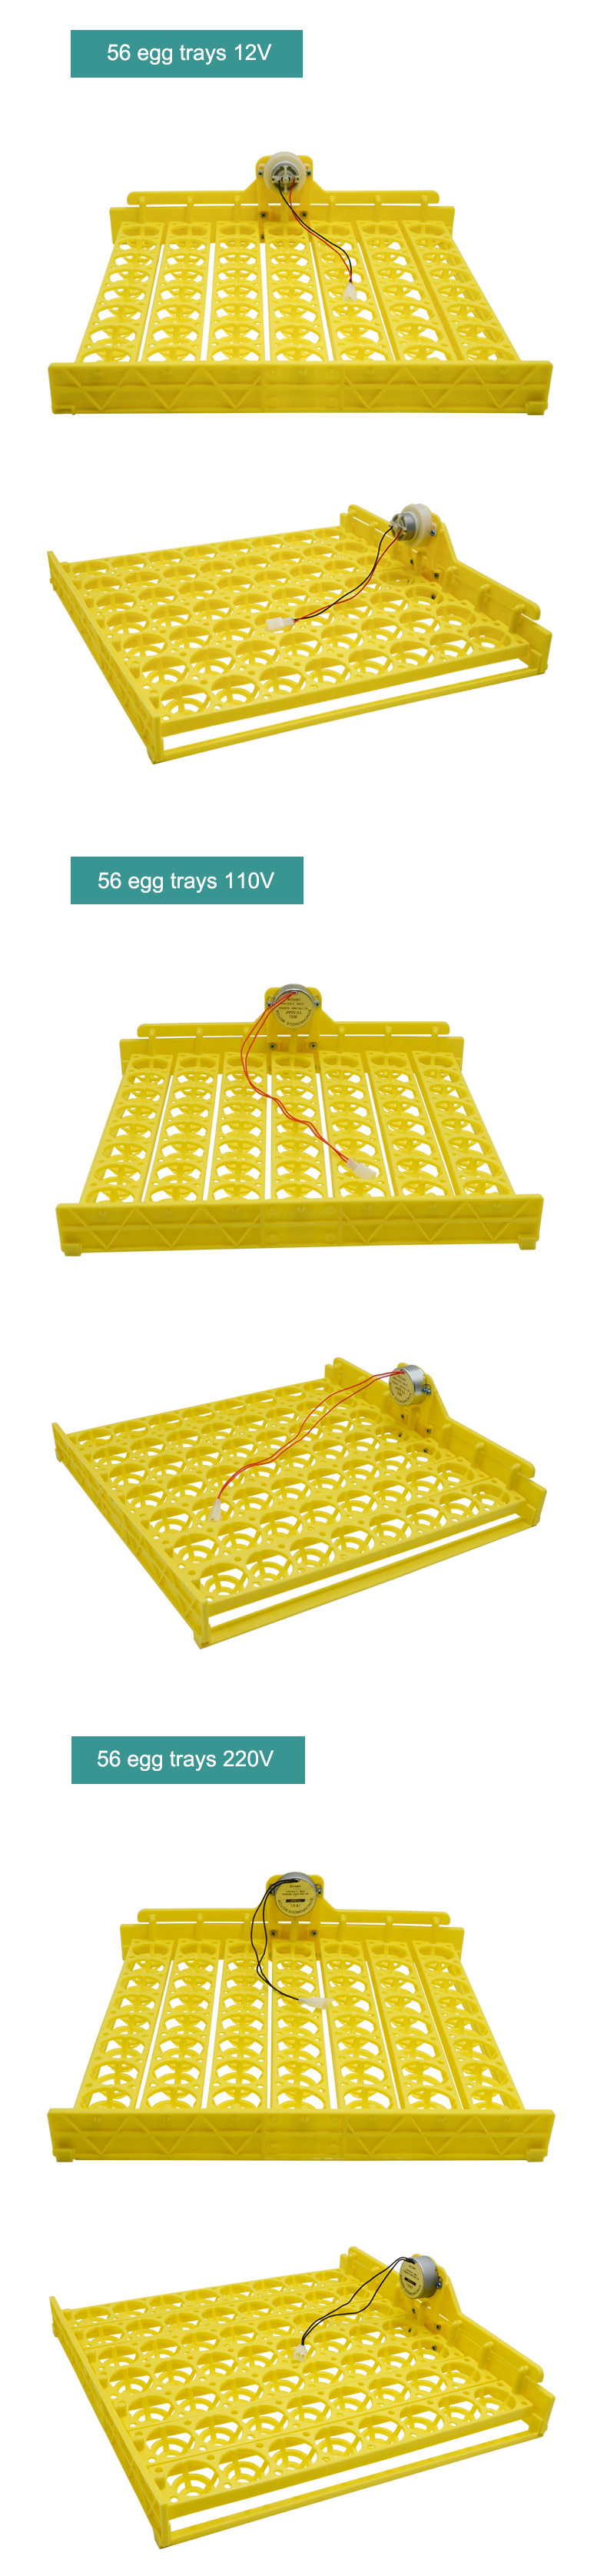 56 Egg Tray with Motor Egg Incubator Spare Parts